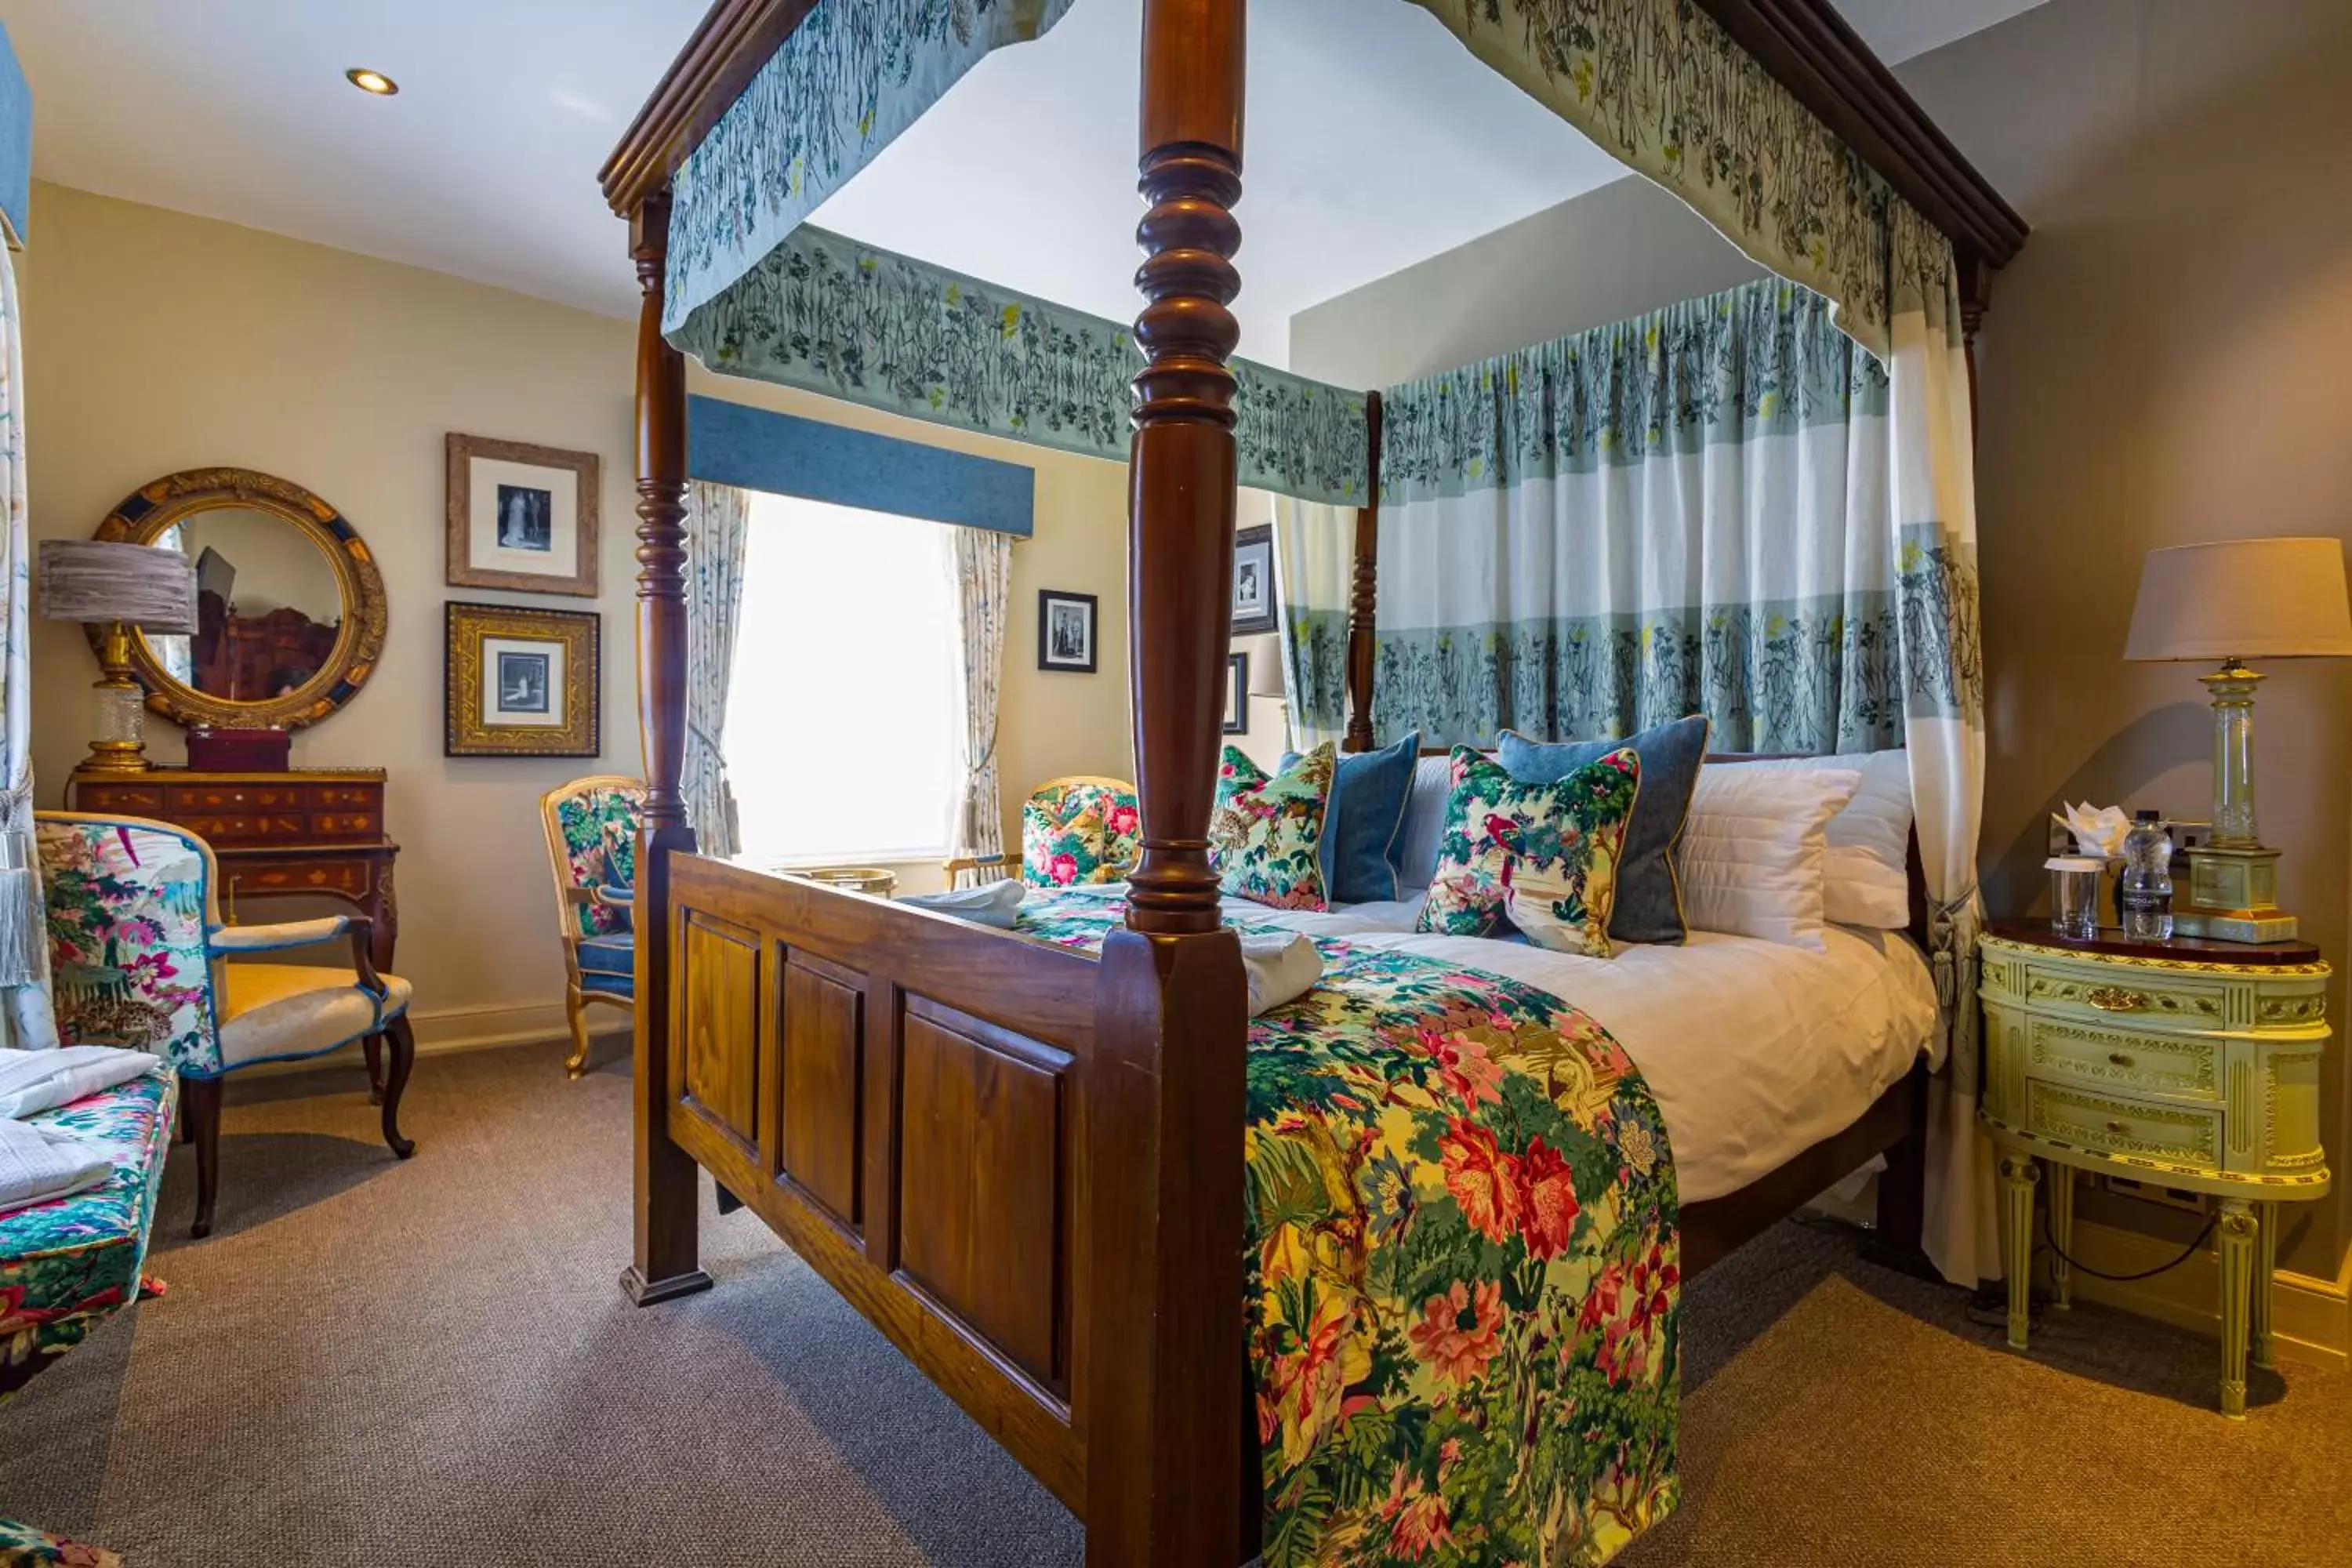 Bedroom in The Rutland Arms Hotel, Bakewell, Derbyshire